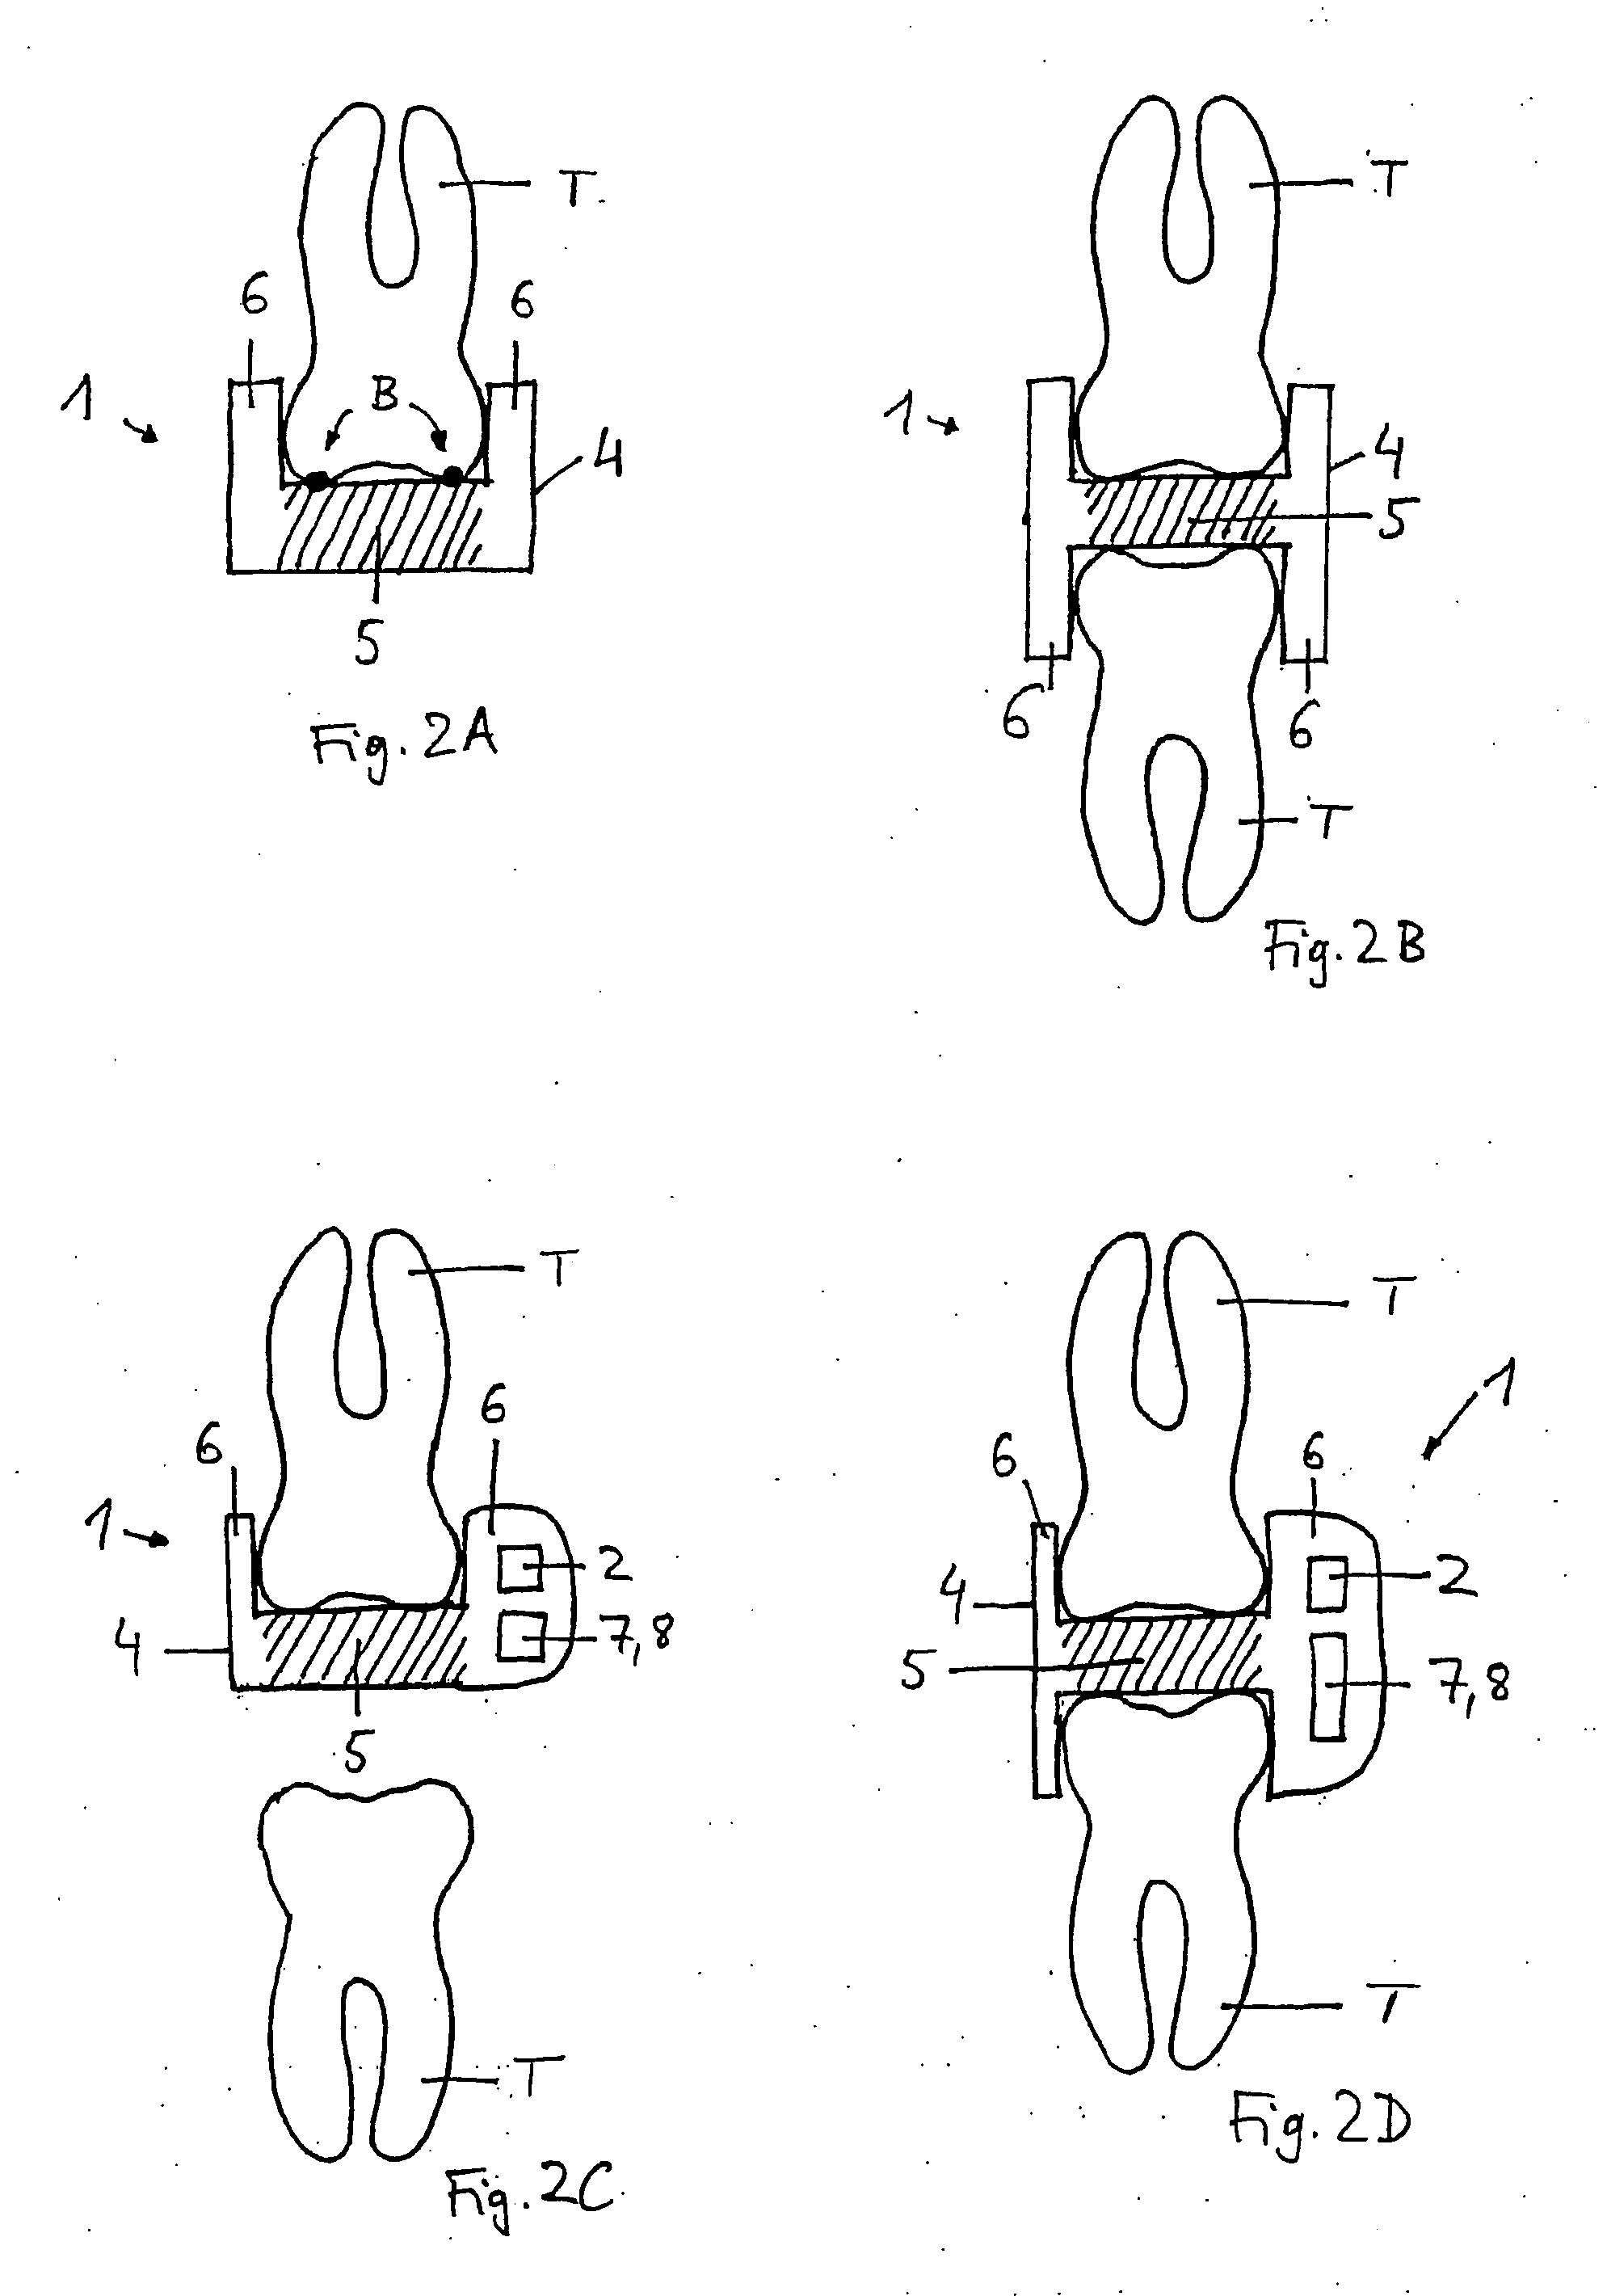 Device for indirectly measuring occlusal forces